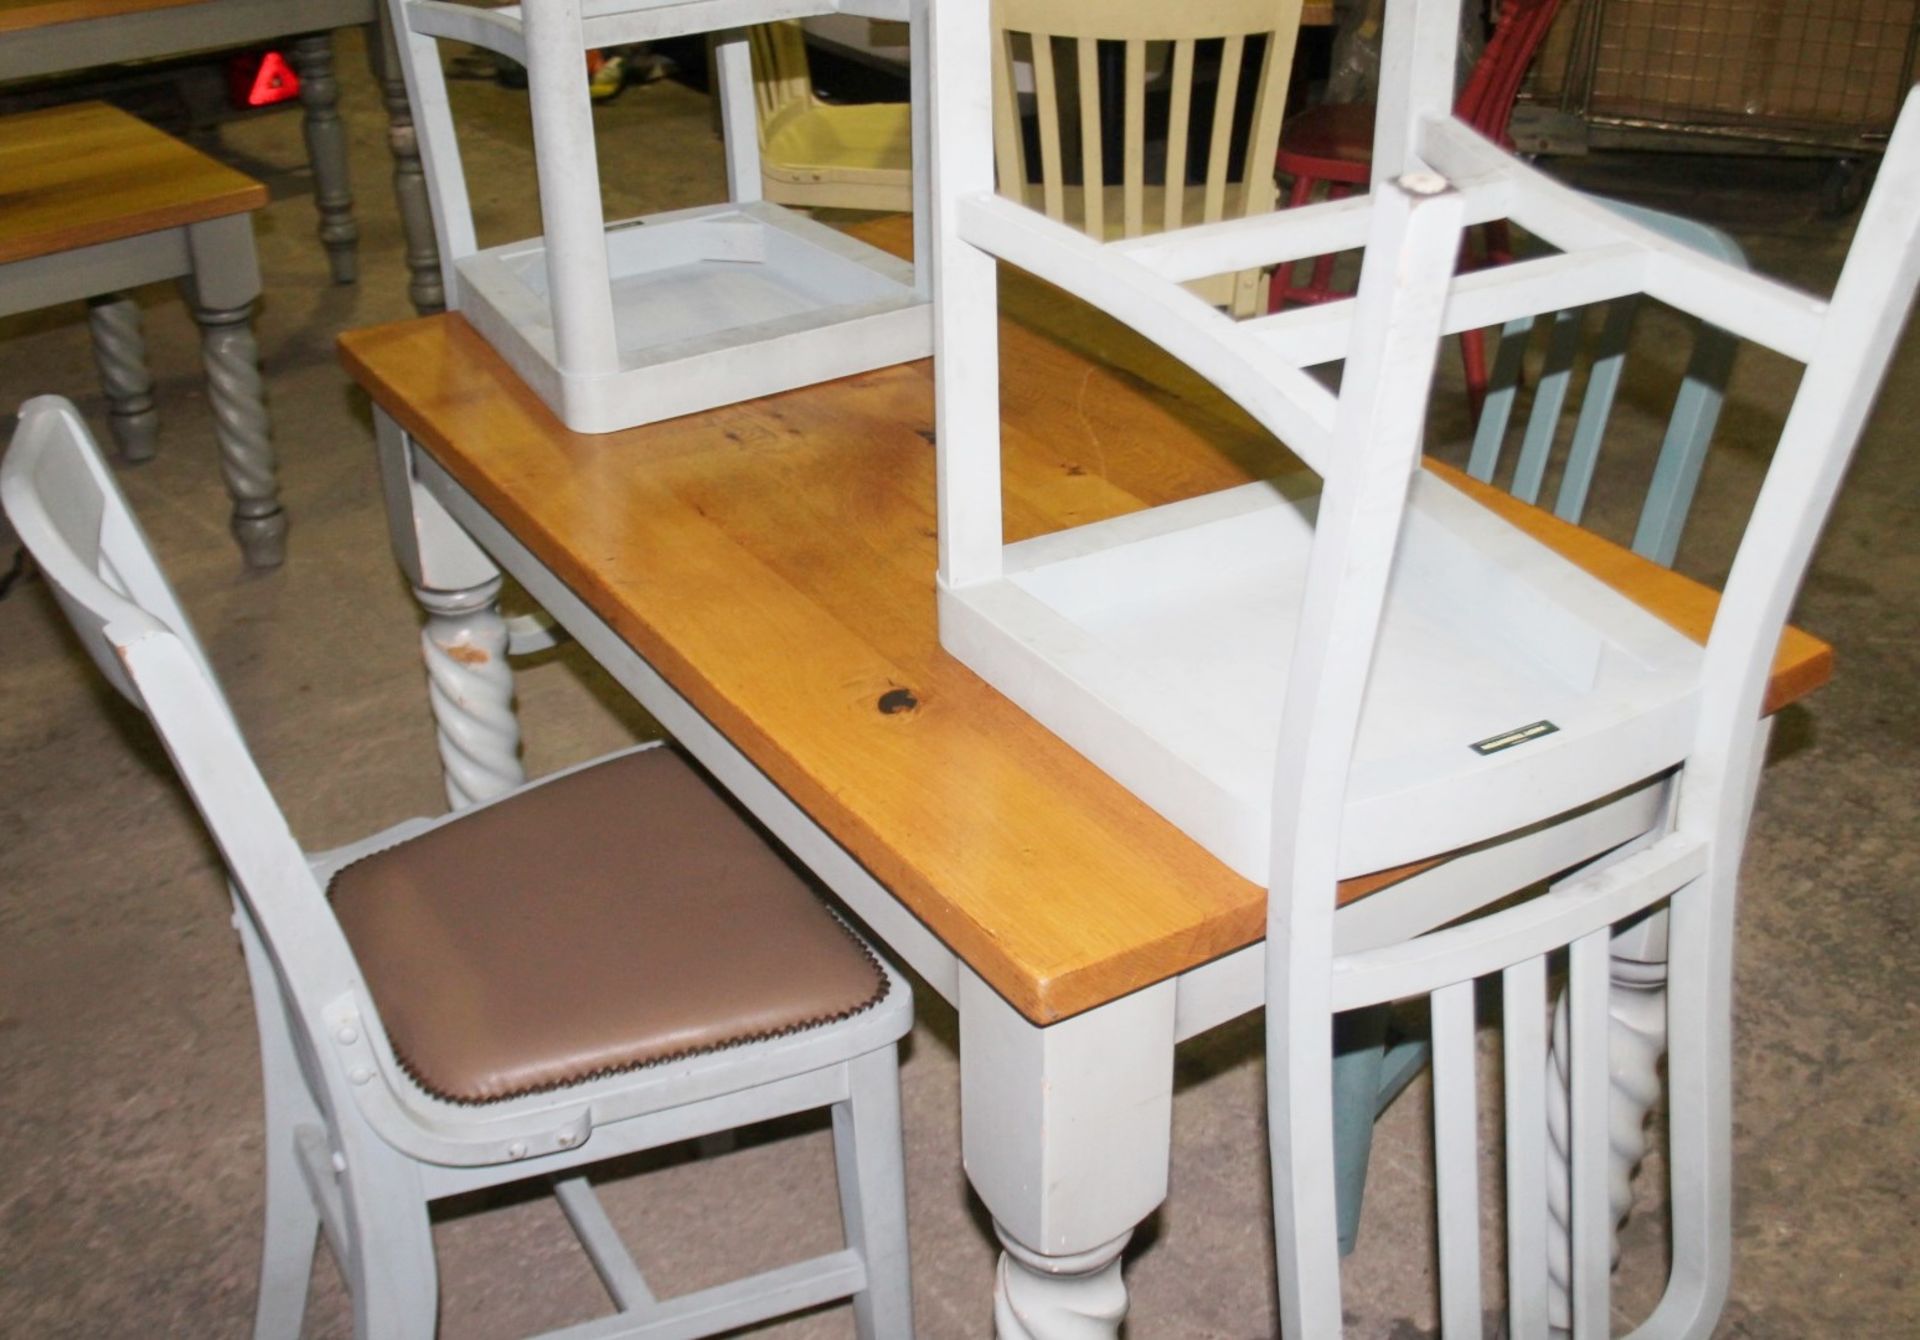 1 x Solid Wood Bistro Table With Turned Legs 4 x Mix-matched Chairs - Image 4 of 4